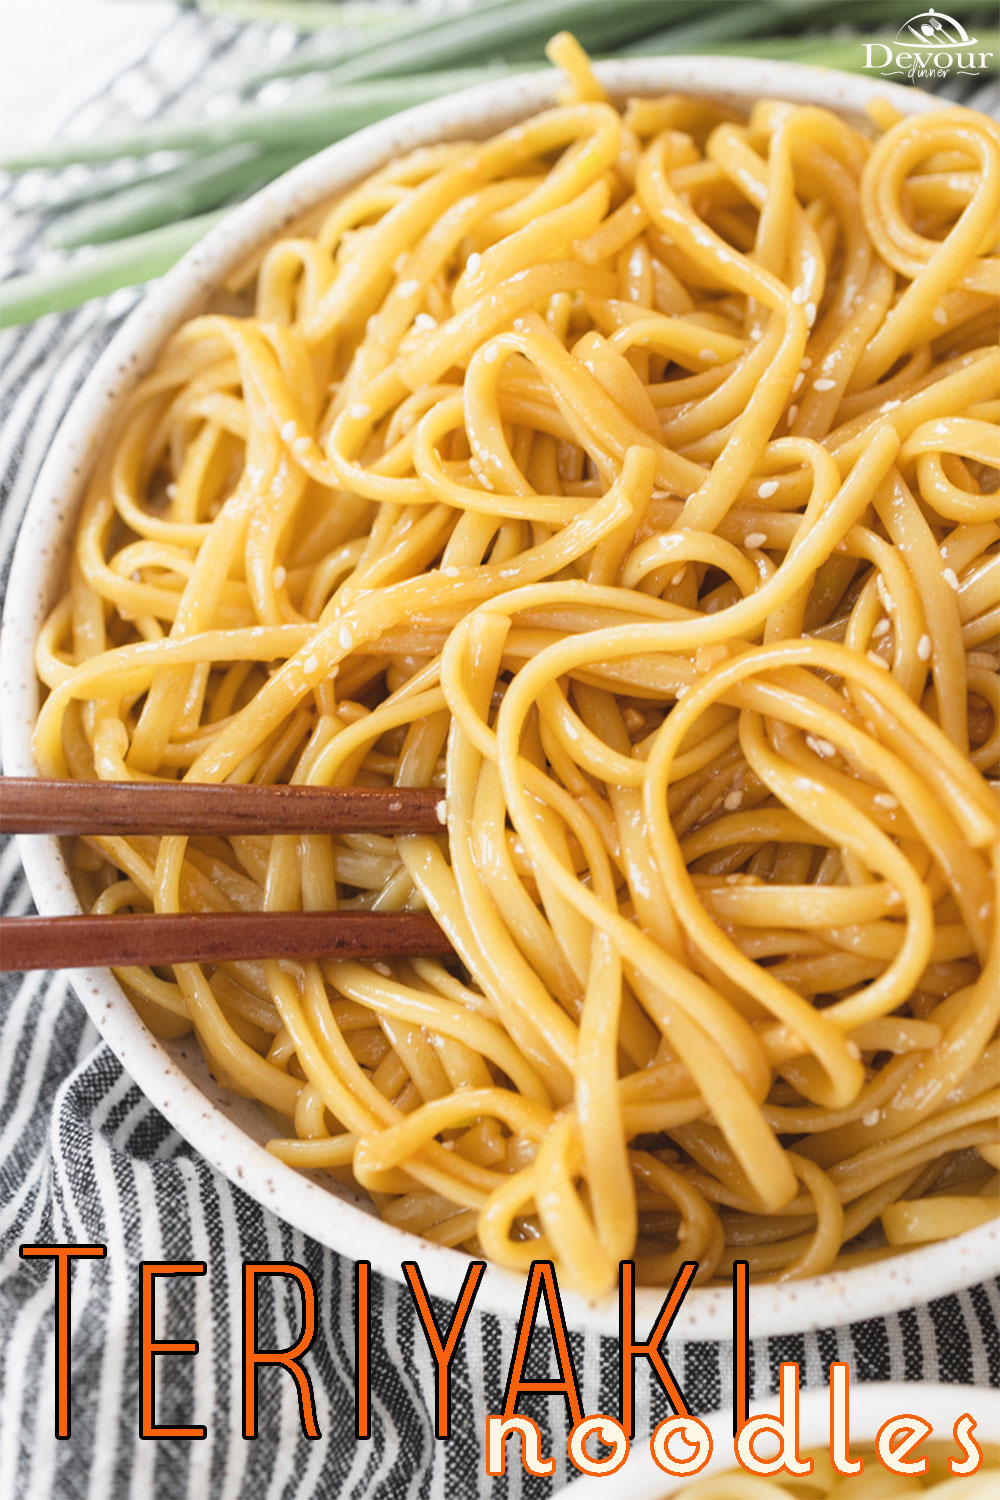 Have you tried Teriyaki Noodles? This simple recipe is a must when I eat at a Japanese Hibachi Resturant. So why not make them at home too? Of course you can dress these up and add some steak, chicken or shrimp but start of tradition and make these quick and easy Teriyaki Noodles. #devourdinner #recipes #recipe #food #Foodie #Foodblogger #easyrecipes #dinner #appetizer #Sidedish #yummy #japanese #asiannoodle #teriyakinoodle #noodle #Pasta #Teriyaki #easydinnerrecipe #kikkoman #soysauce